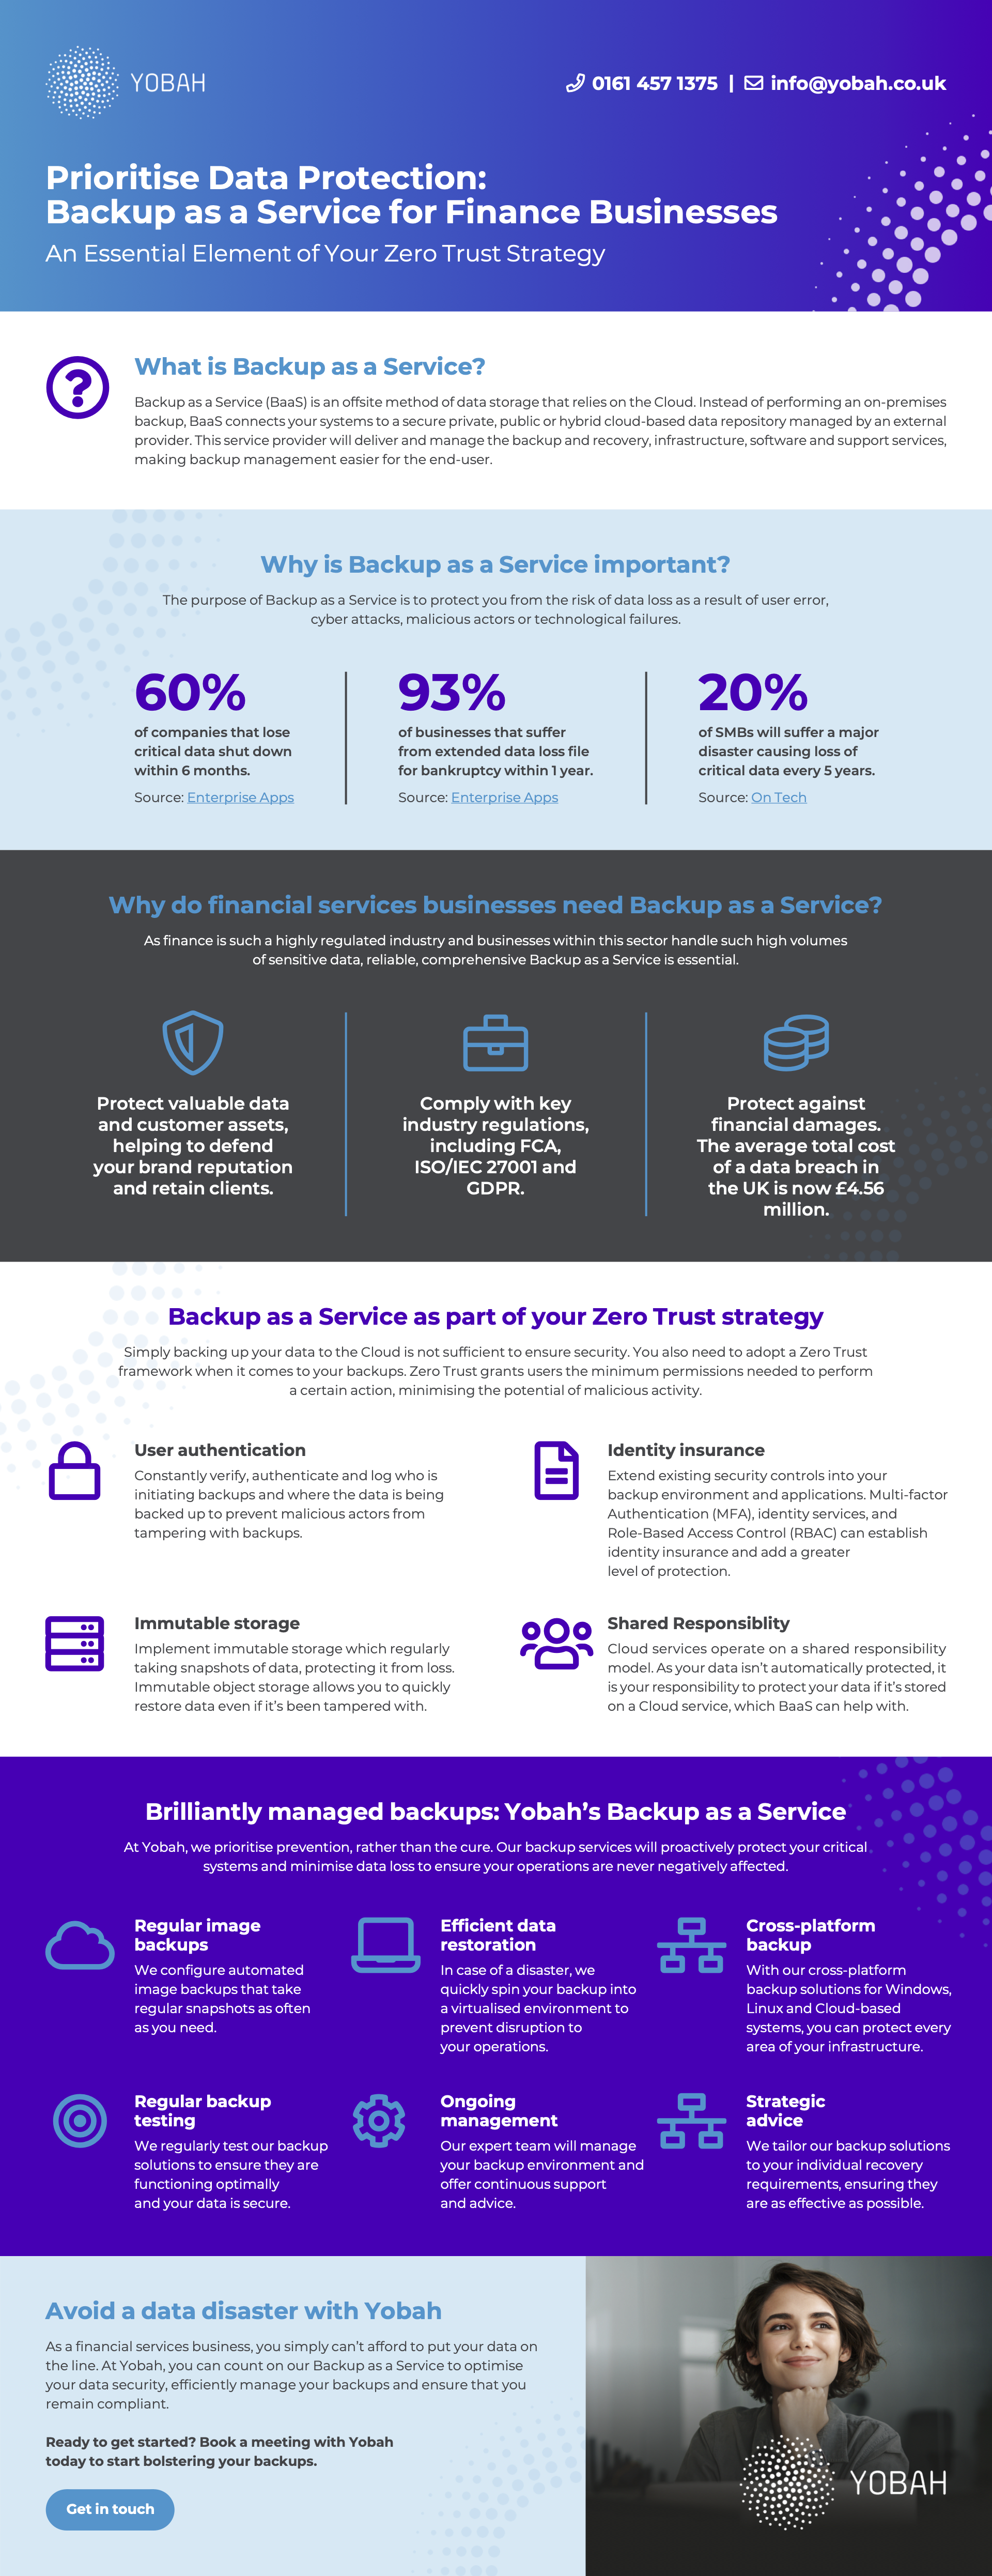 Yobah - Infographic - Backup as a Service (1)